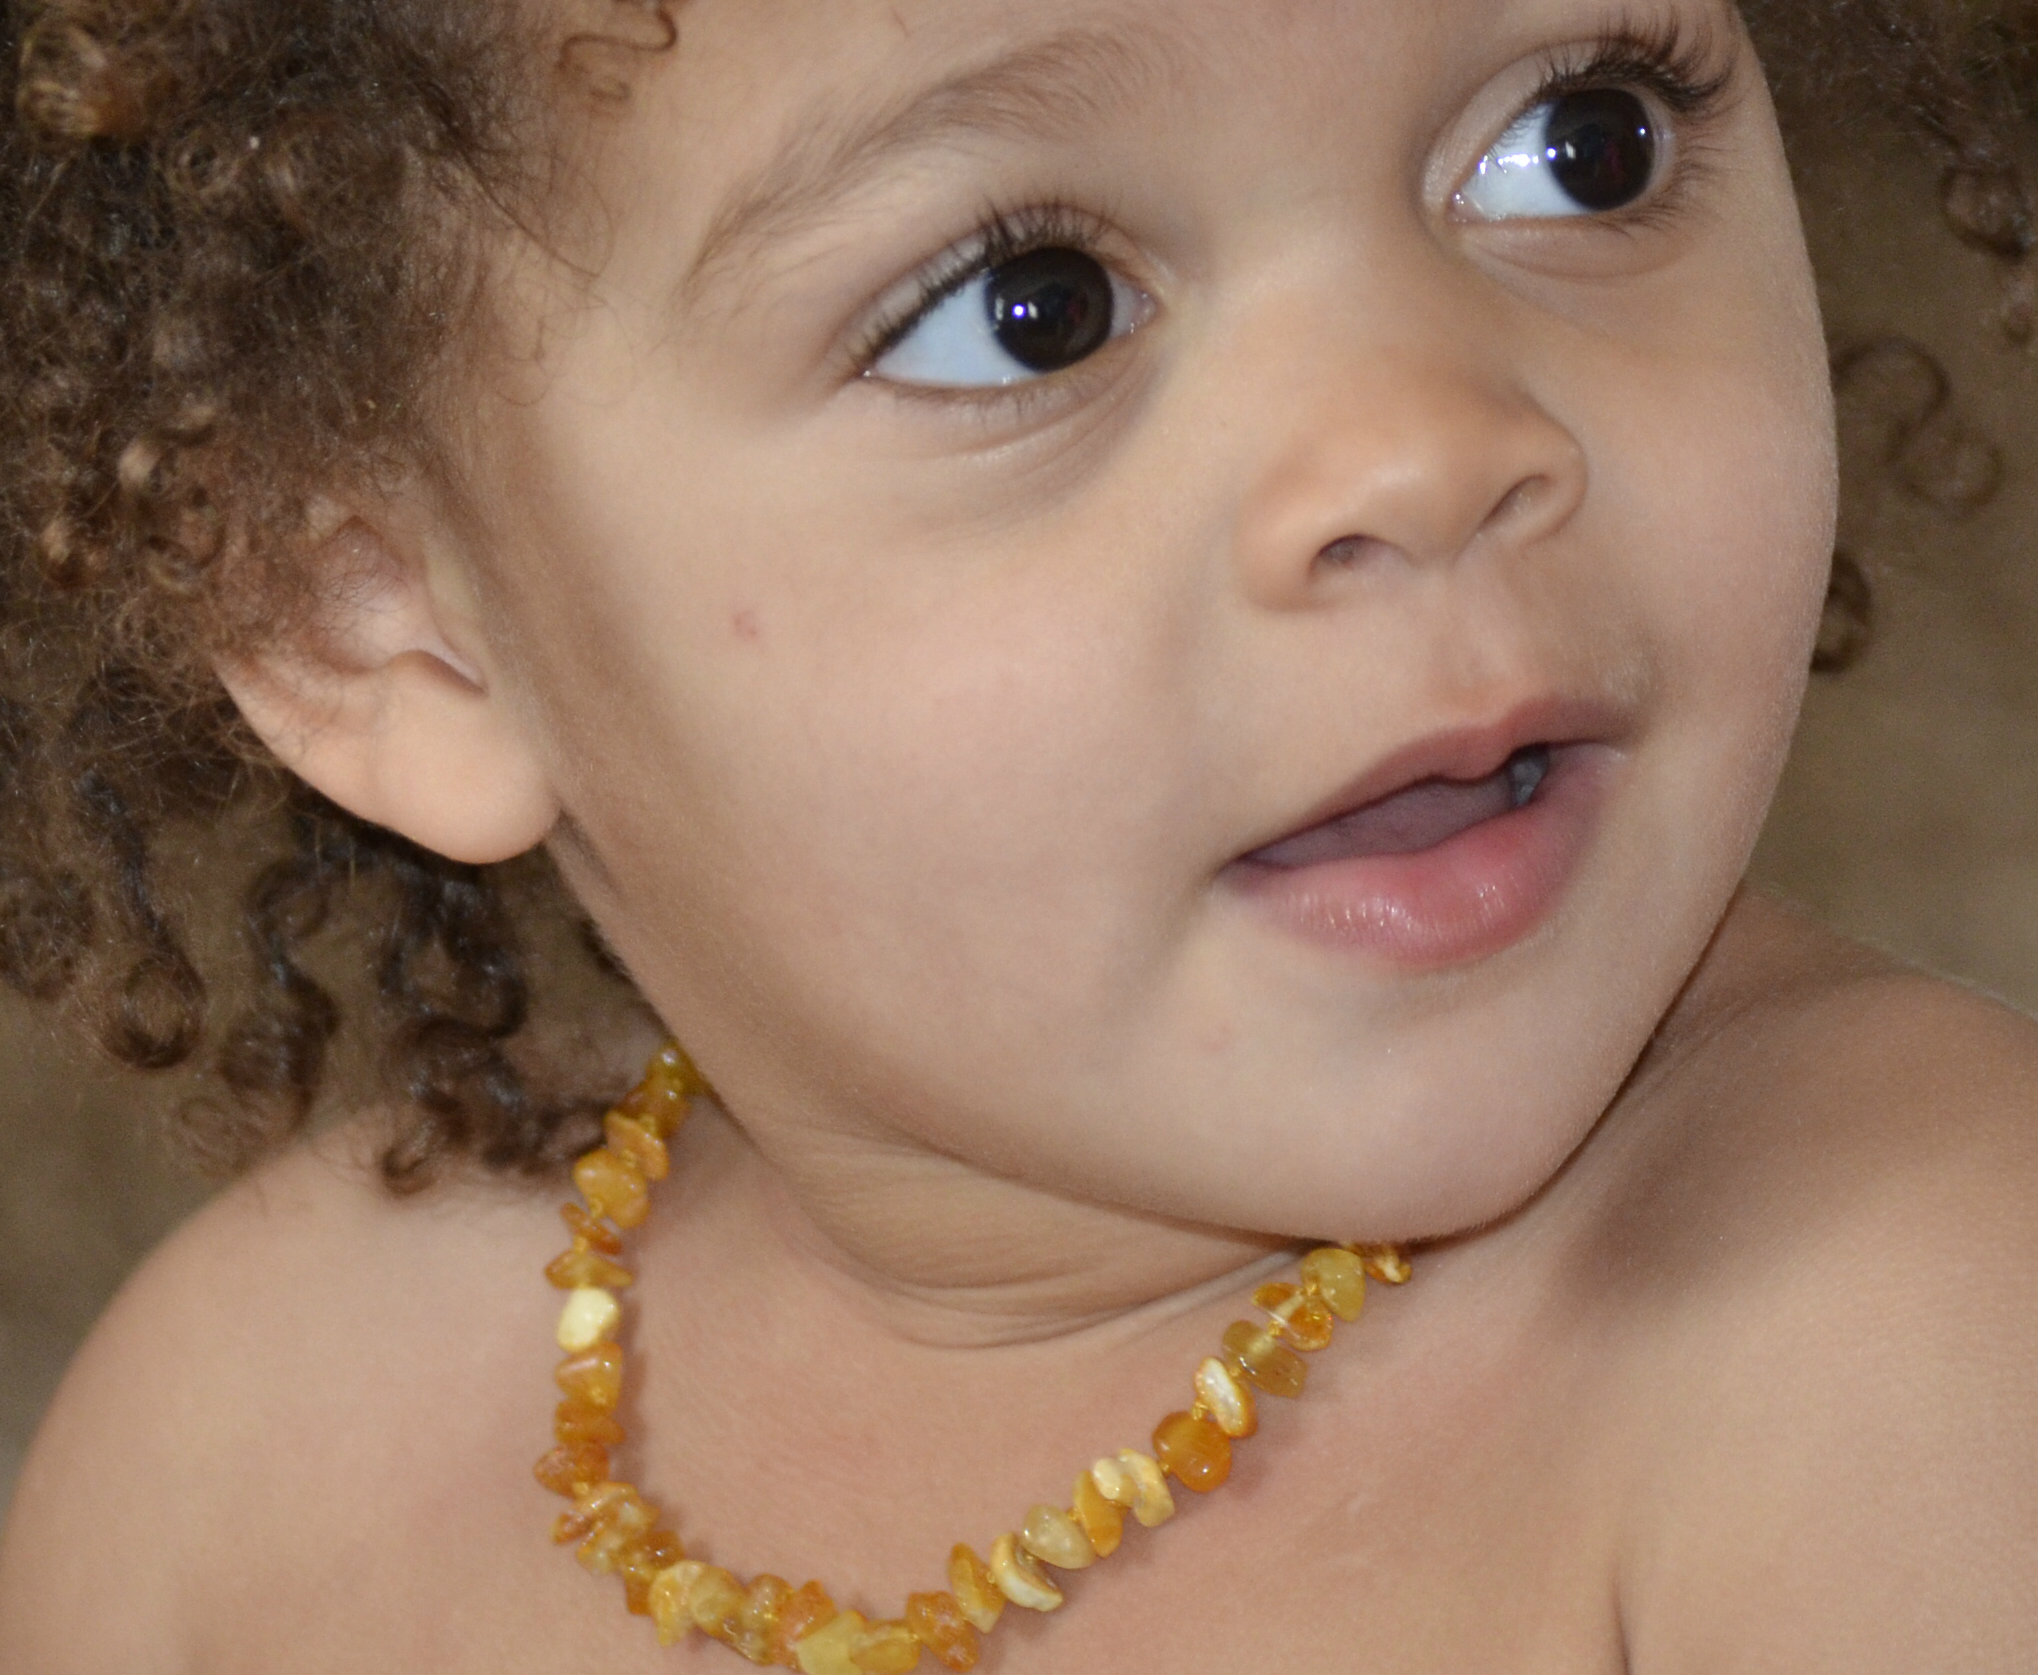 Baby wearing amber teething necklace